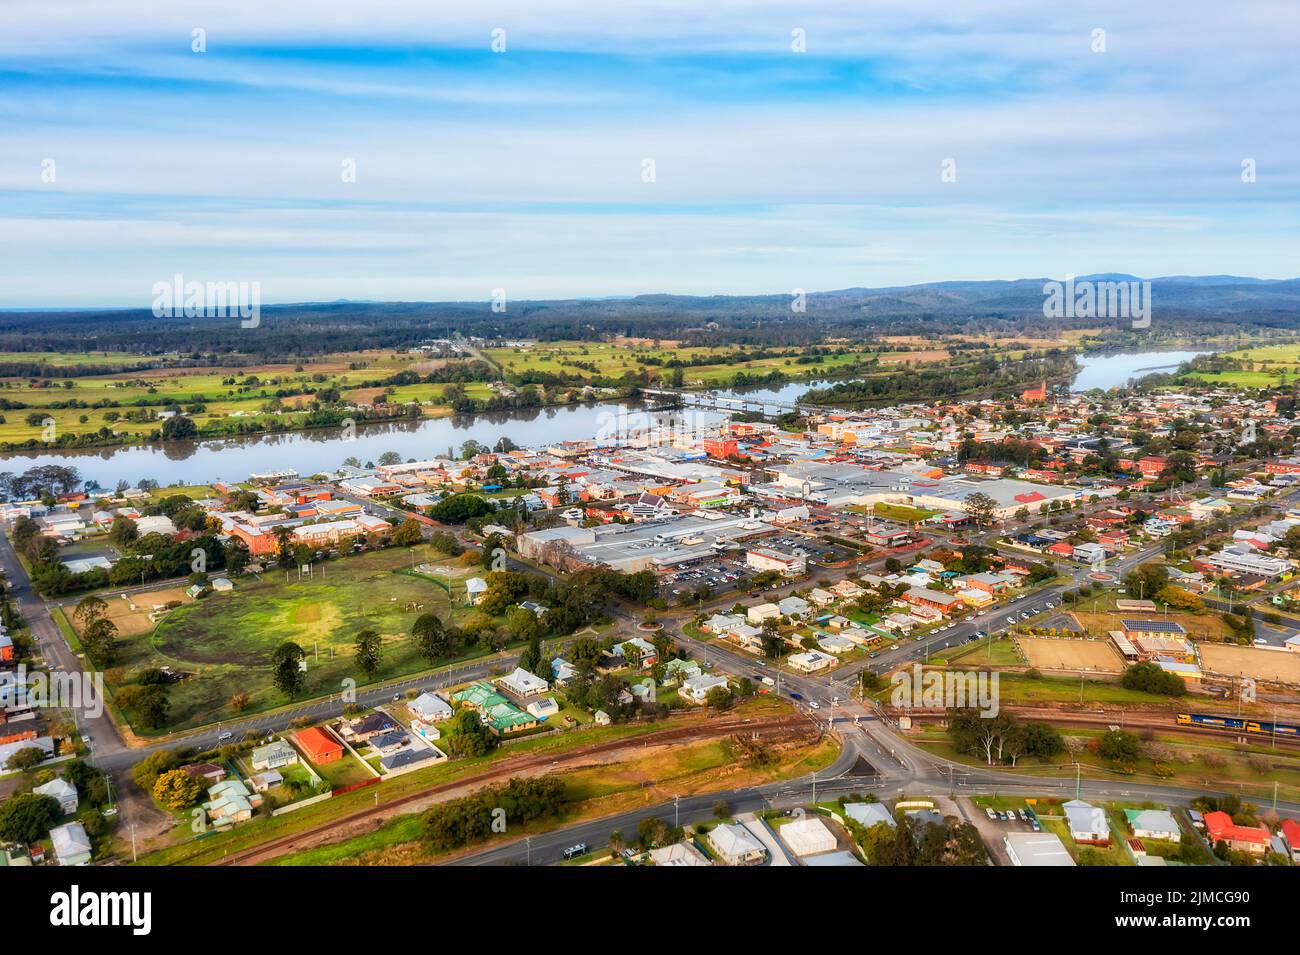 Taree town downtown shopping district and residential suburbs around on shores of Manning river Marting bridge - aerial townscape. Stock Photo